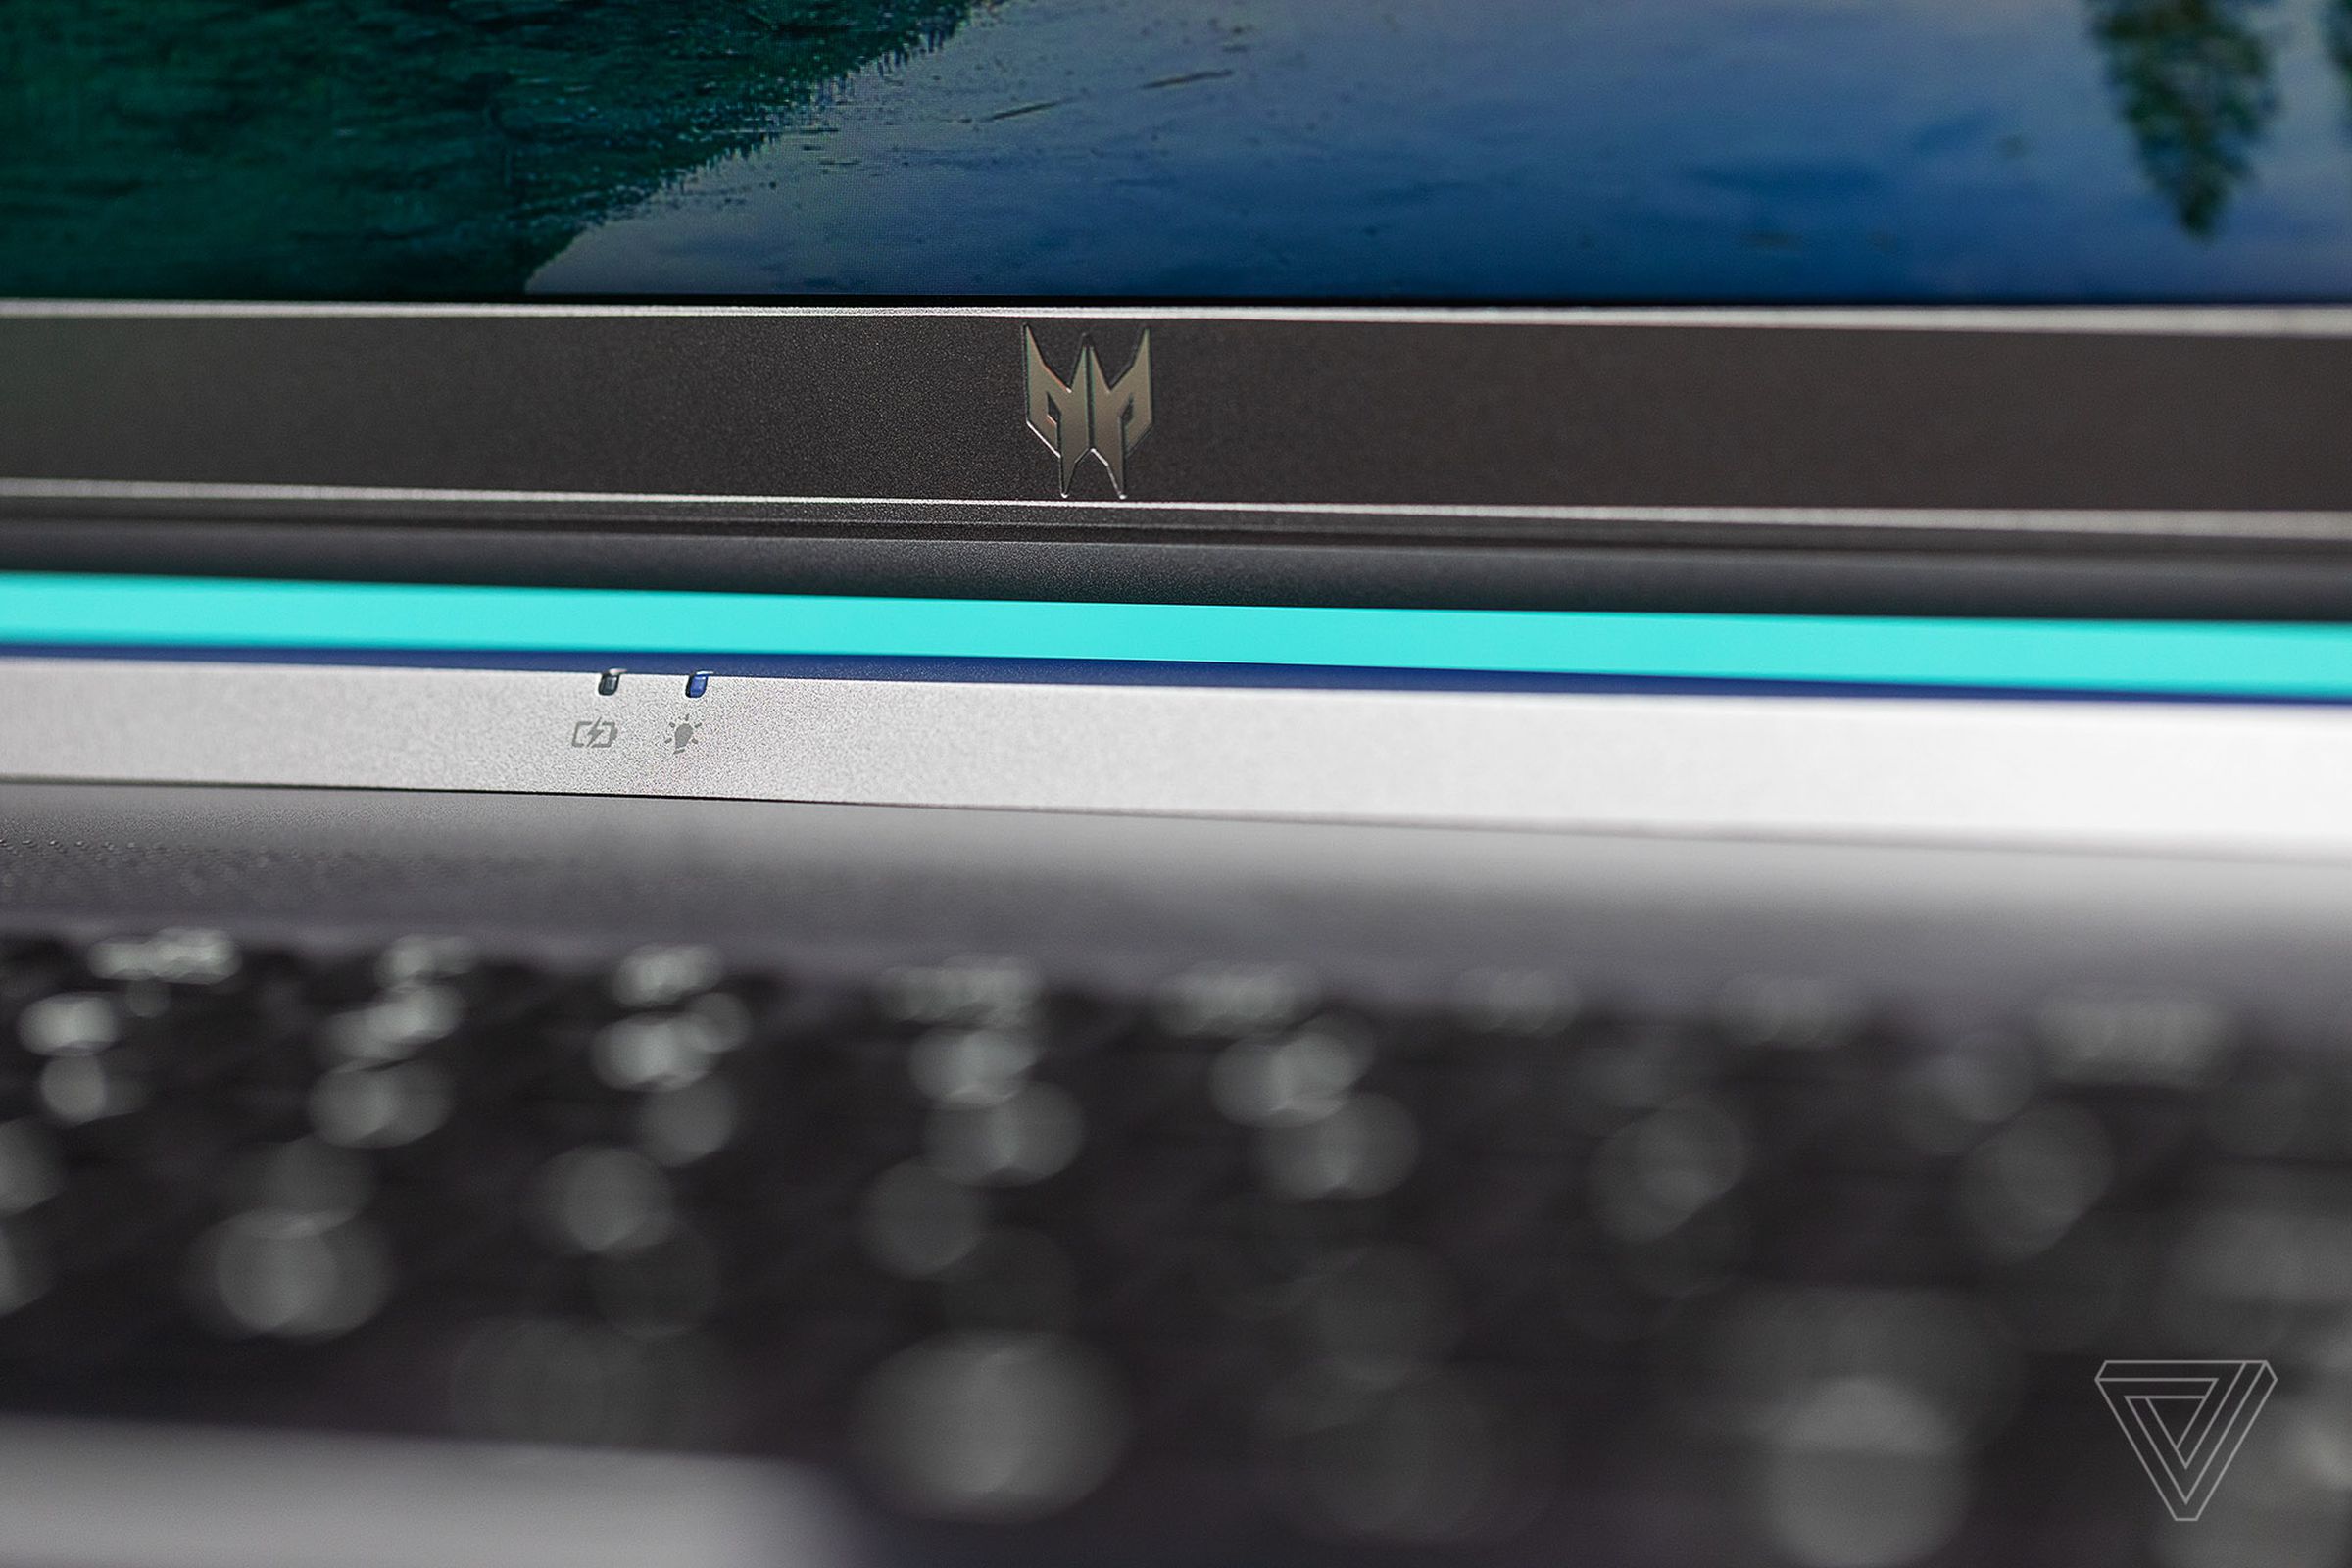 A photo detailing a quarter-inch gap between the display and keyboard on the Acer Predator Triton 500 SE